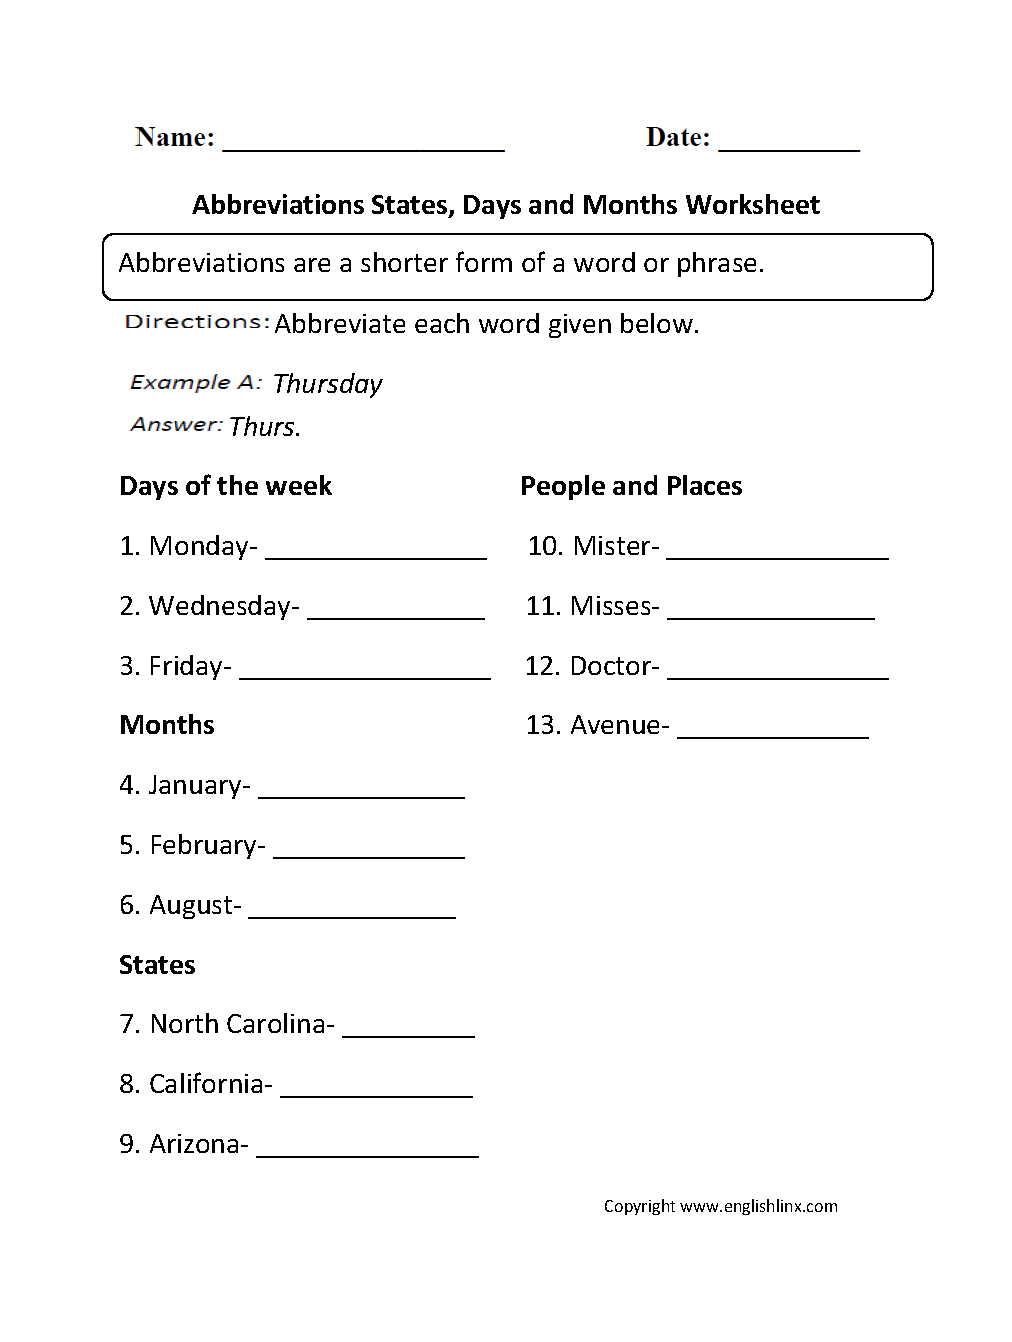 Abbreviating Days, Months and States Worksheet